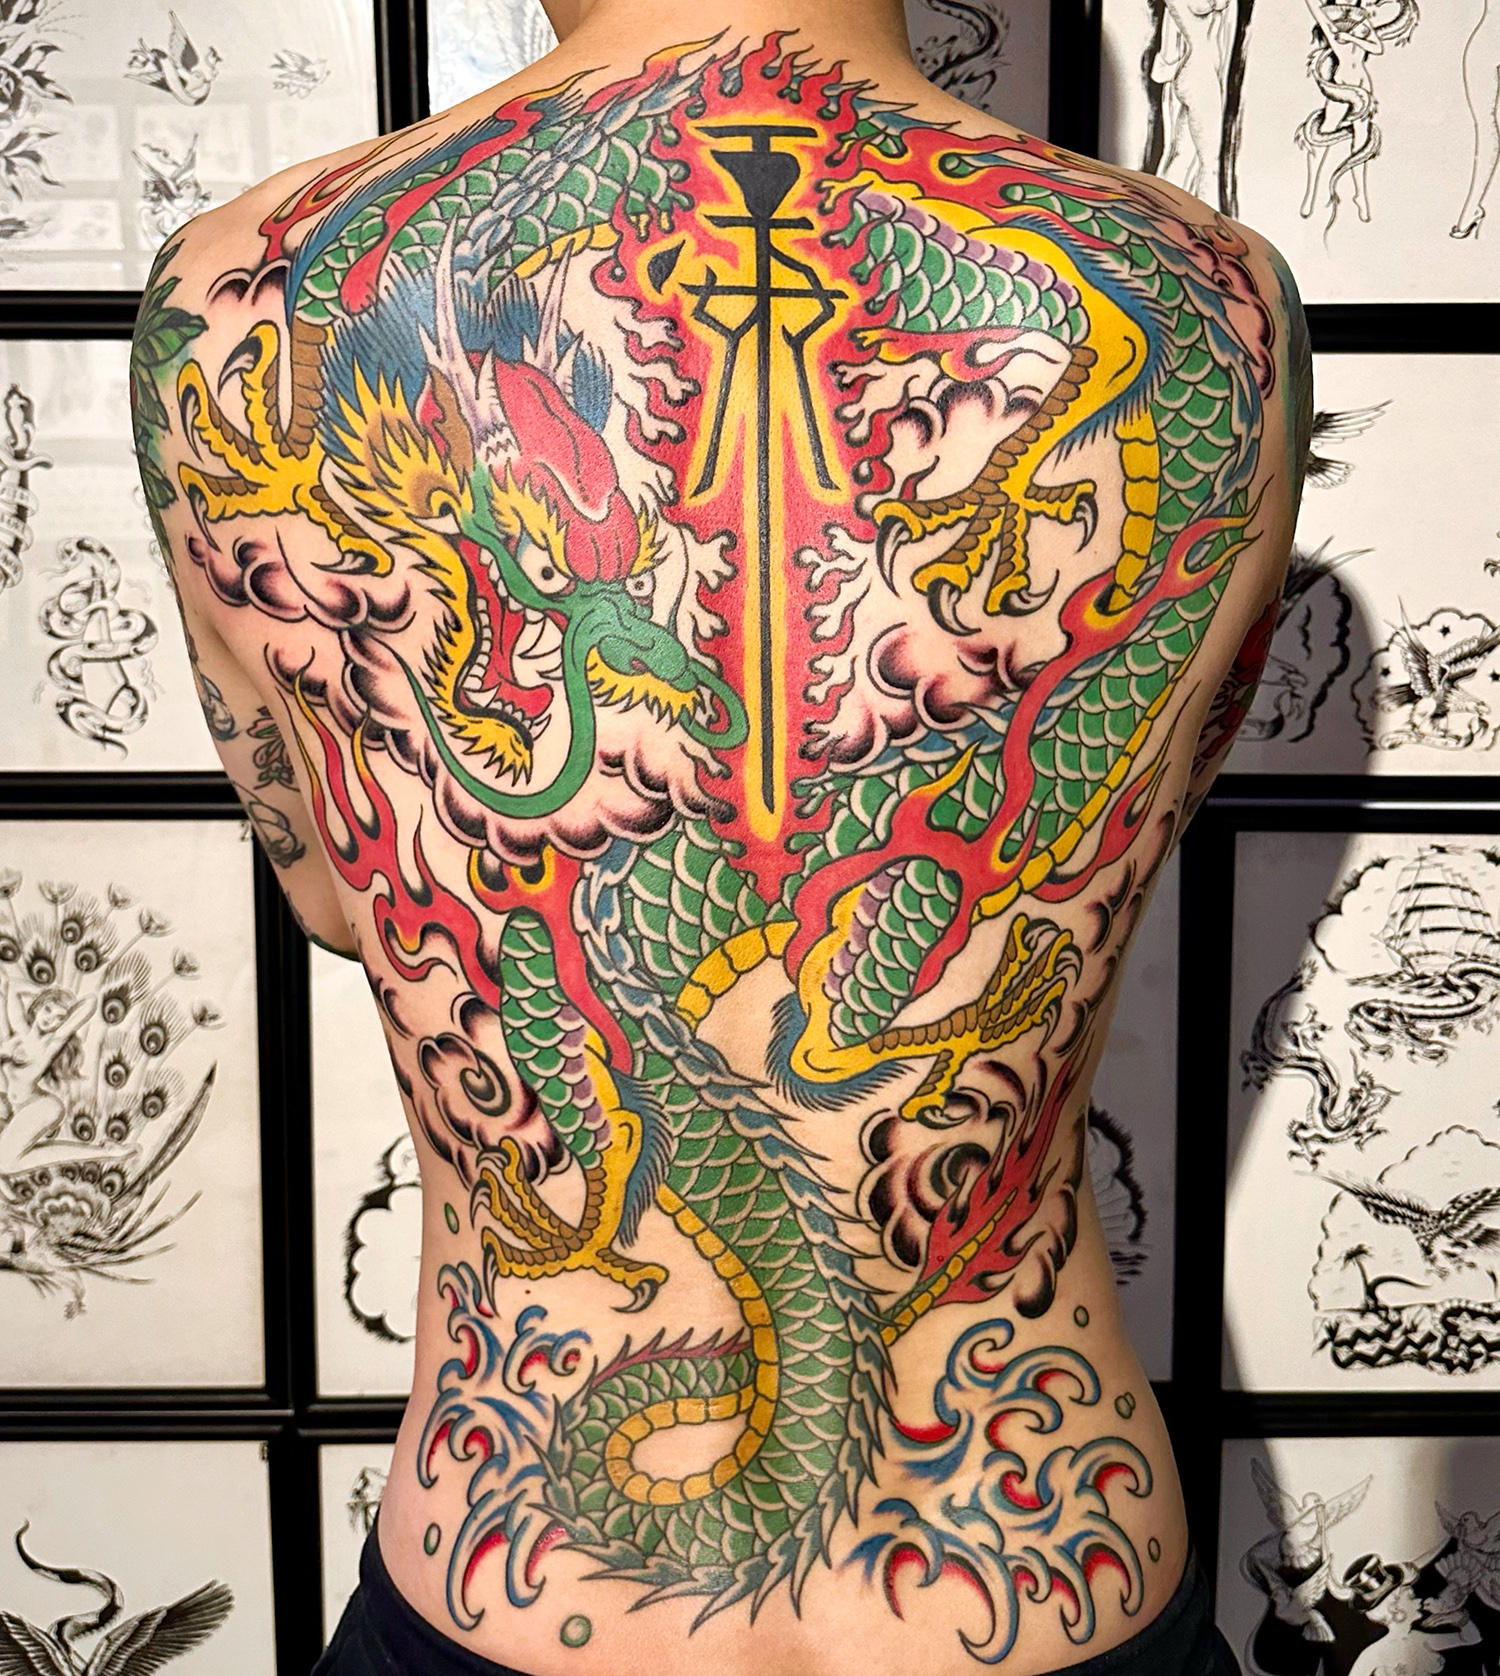 ornate, east asian tattoo on back, bright and color by jimmy shy